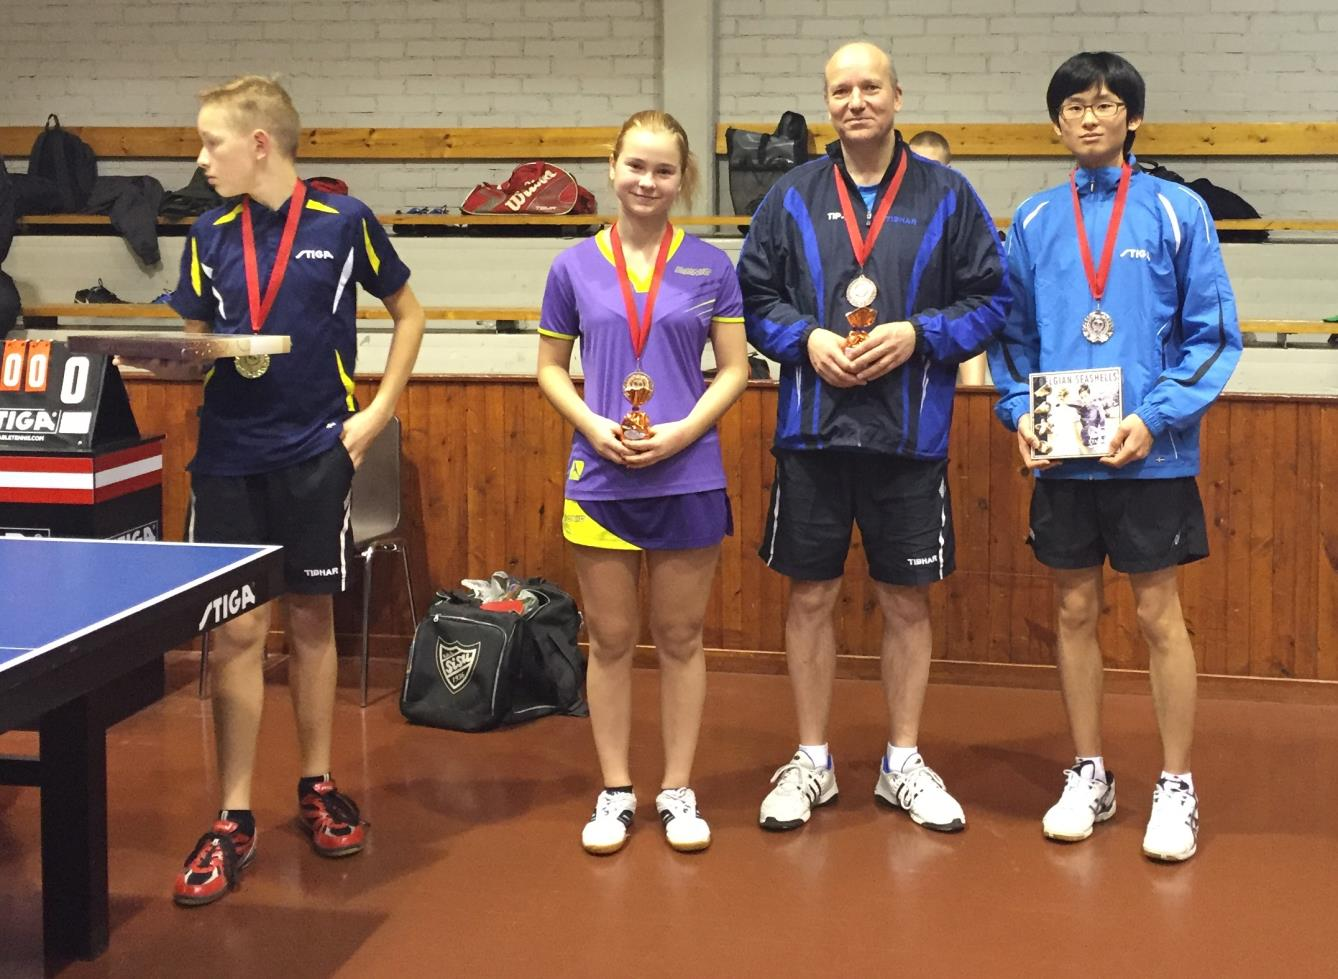 M-1400 Arttu Pöri (on the left) took gold medal in the M-1400 class. We just don't know what was more him 3-0 in the final.